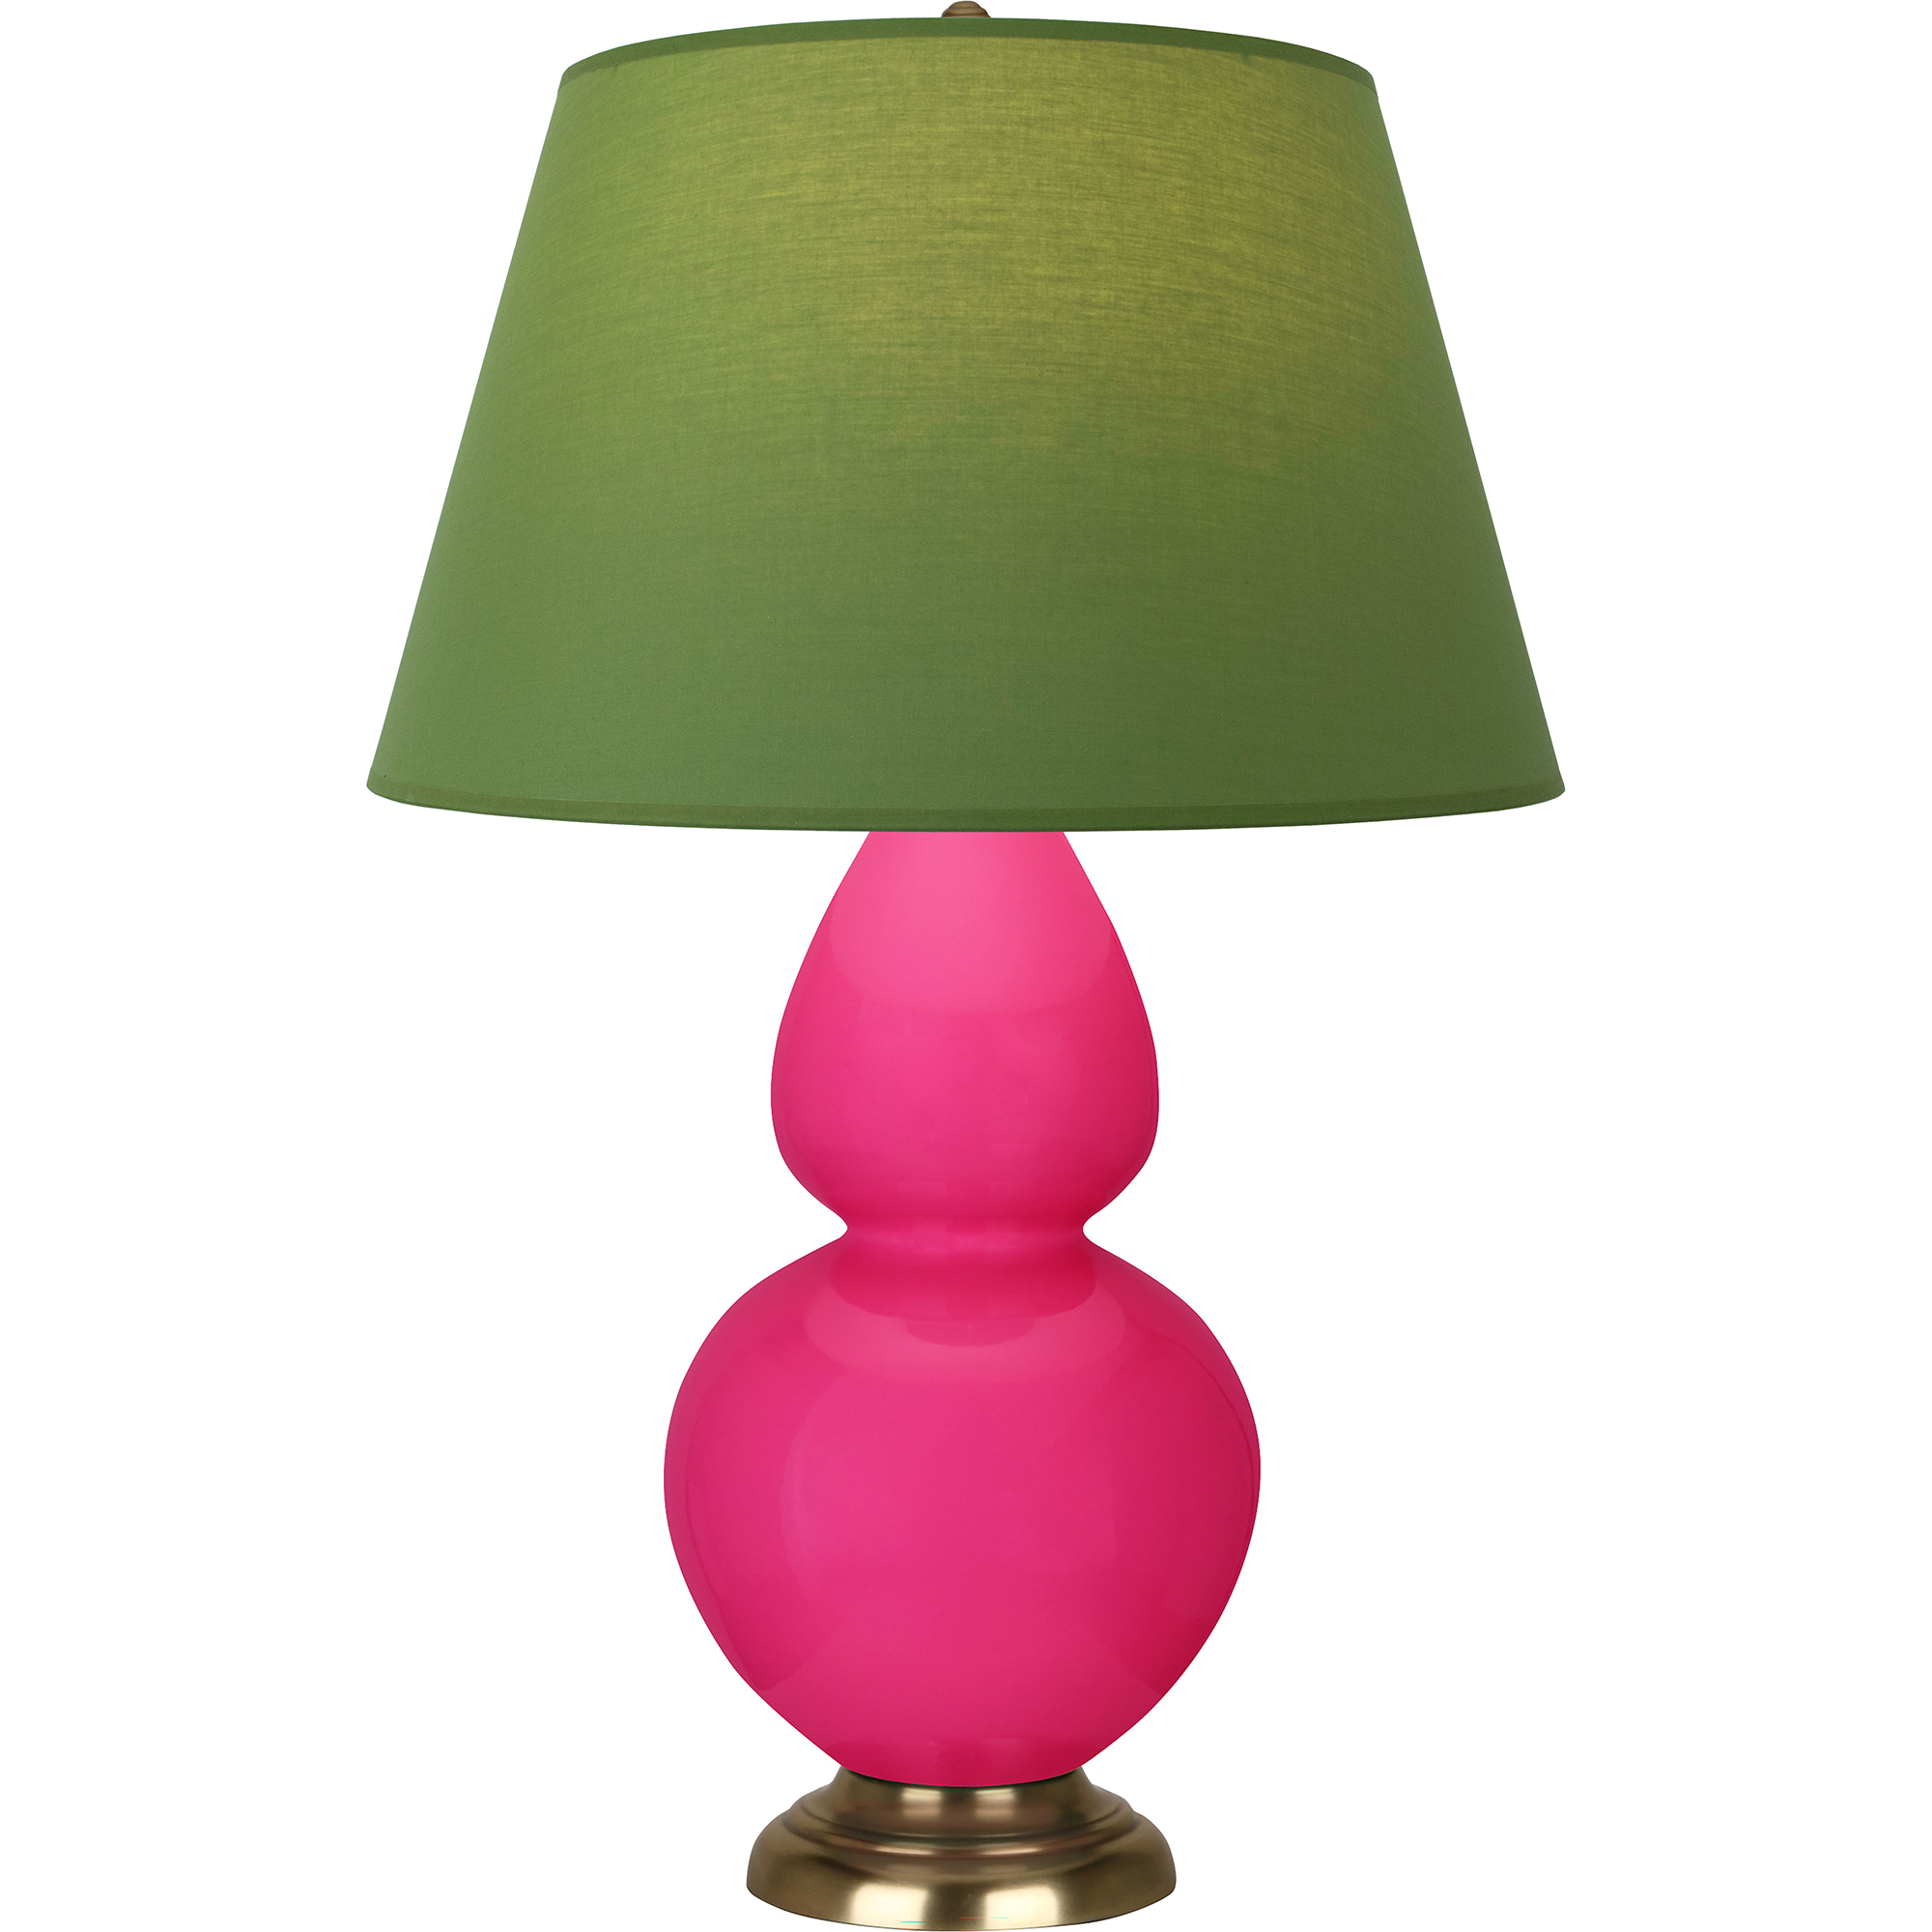 Double Gourd Table Lamp Style #RZ20G